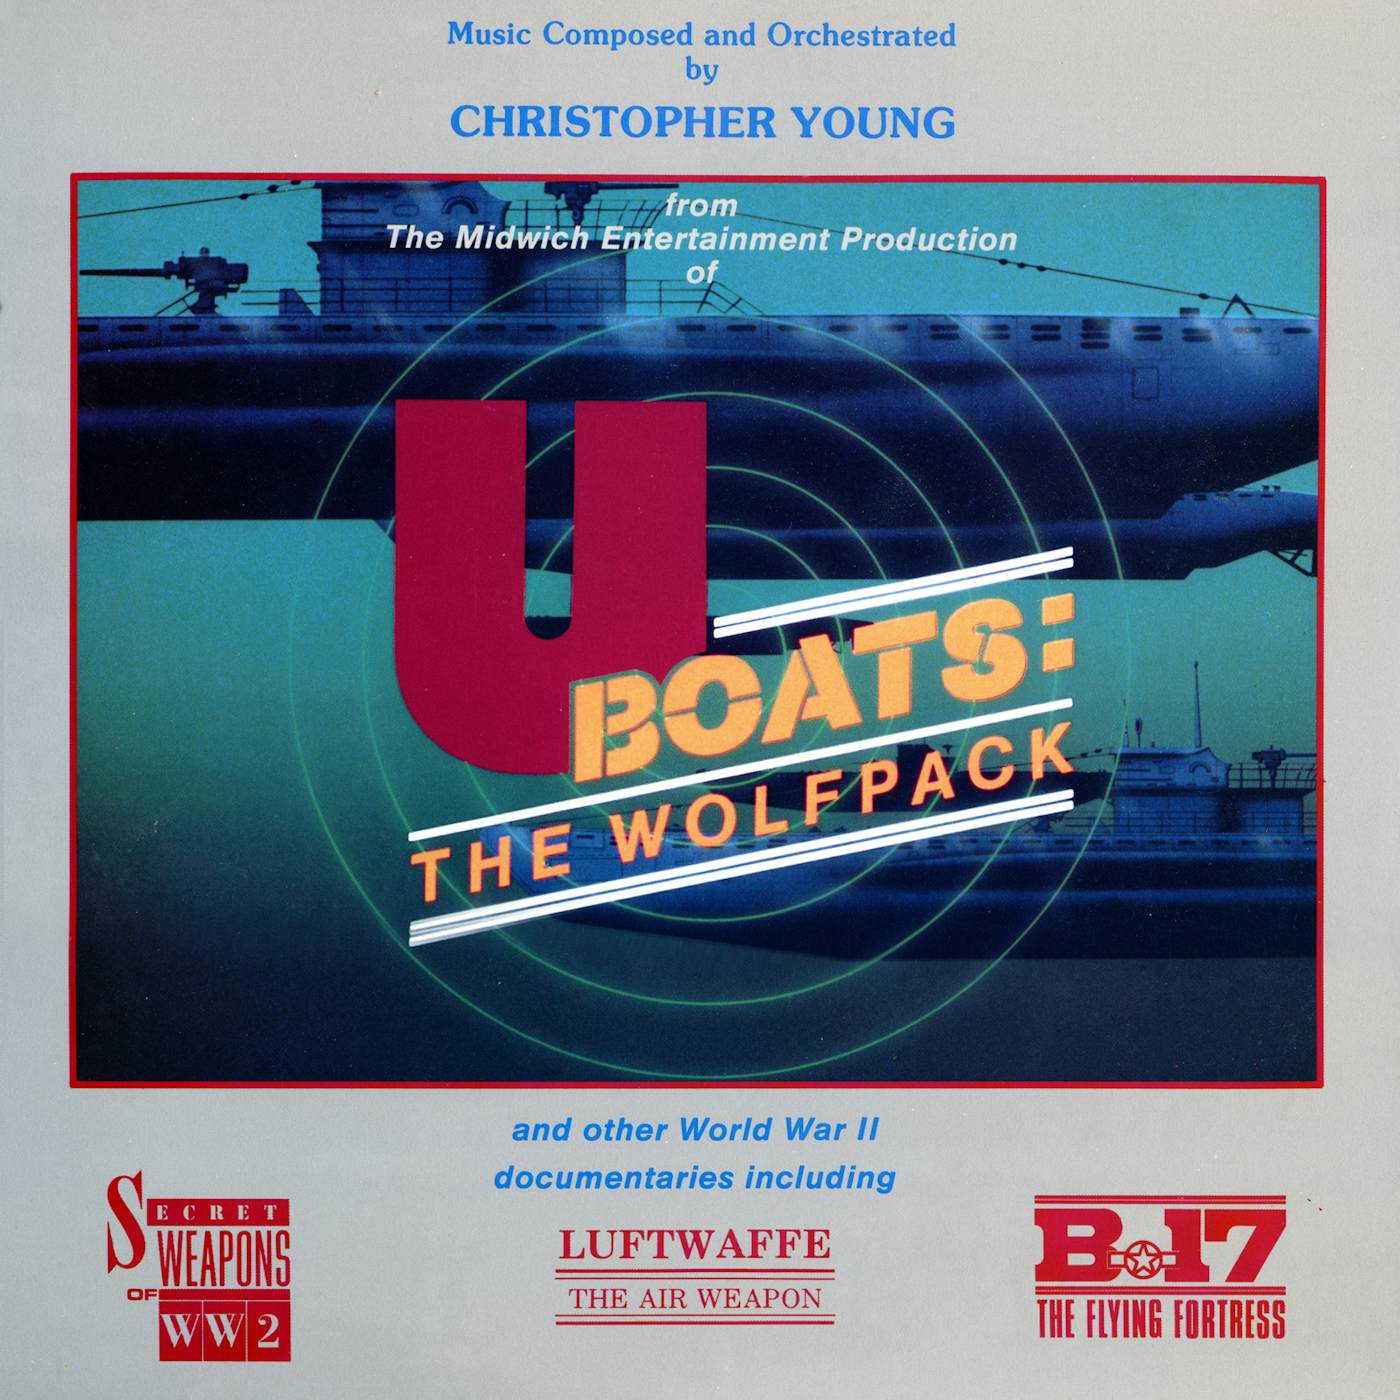 Christopher Young U-BOATS: WOLFPACK AND OTHER DOCUMENTARIES Vinyl Record